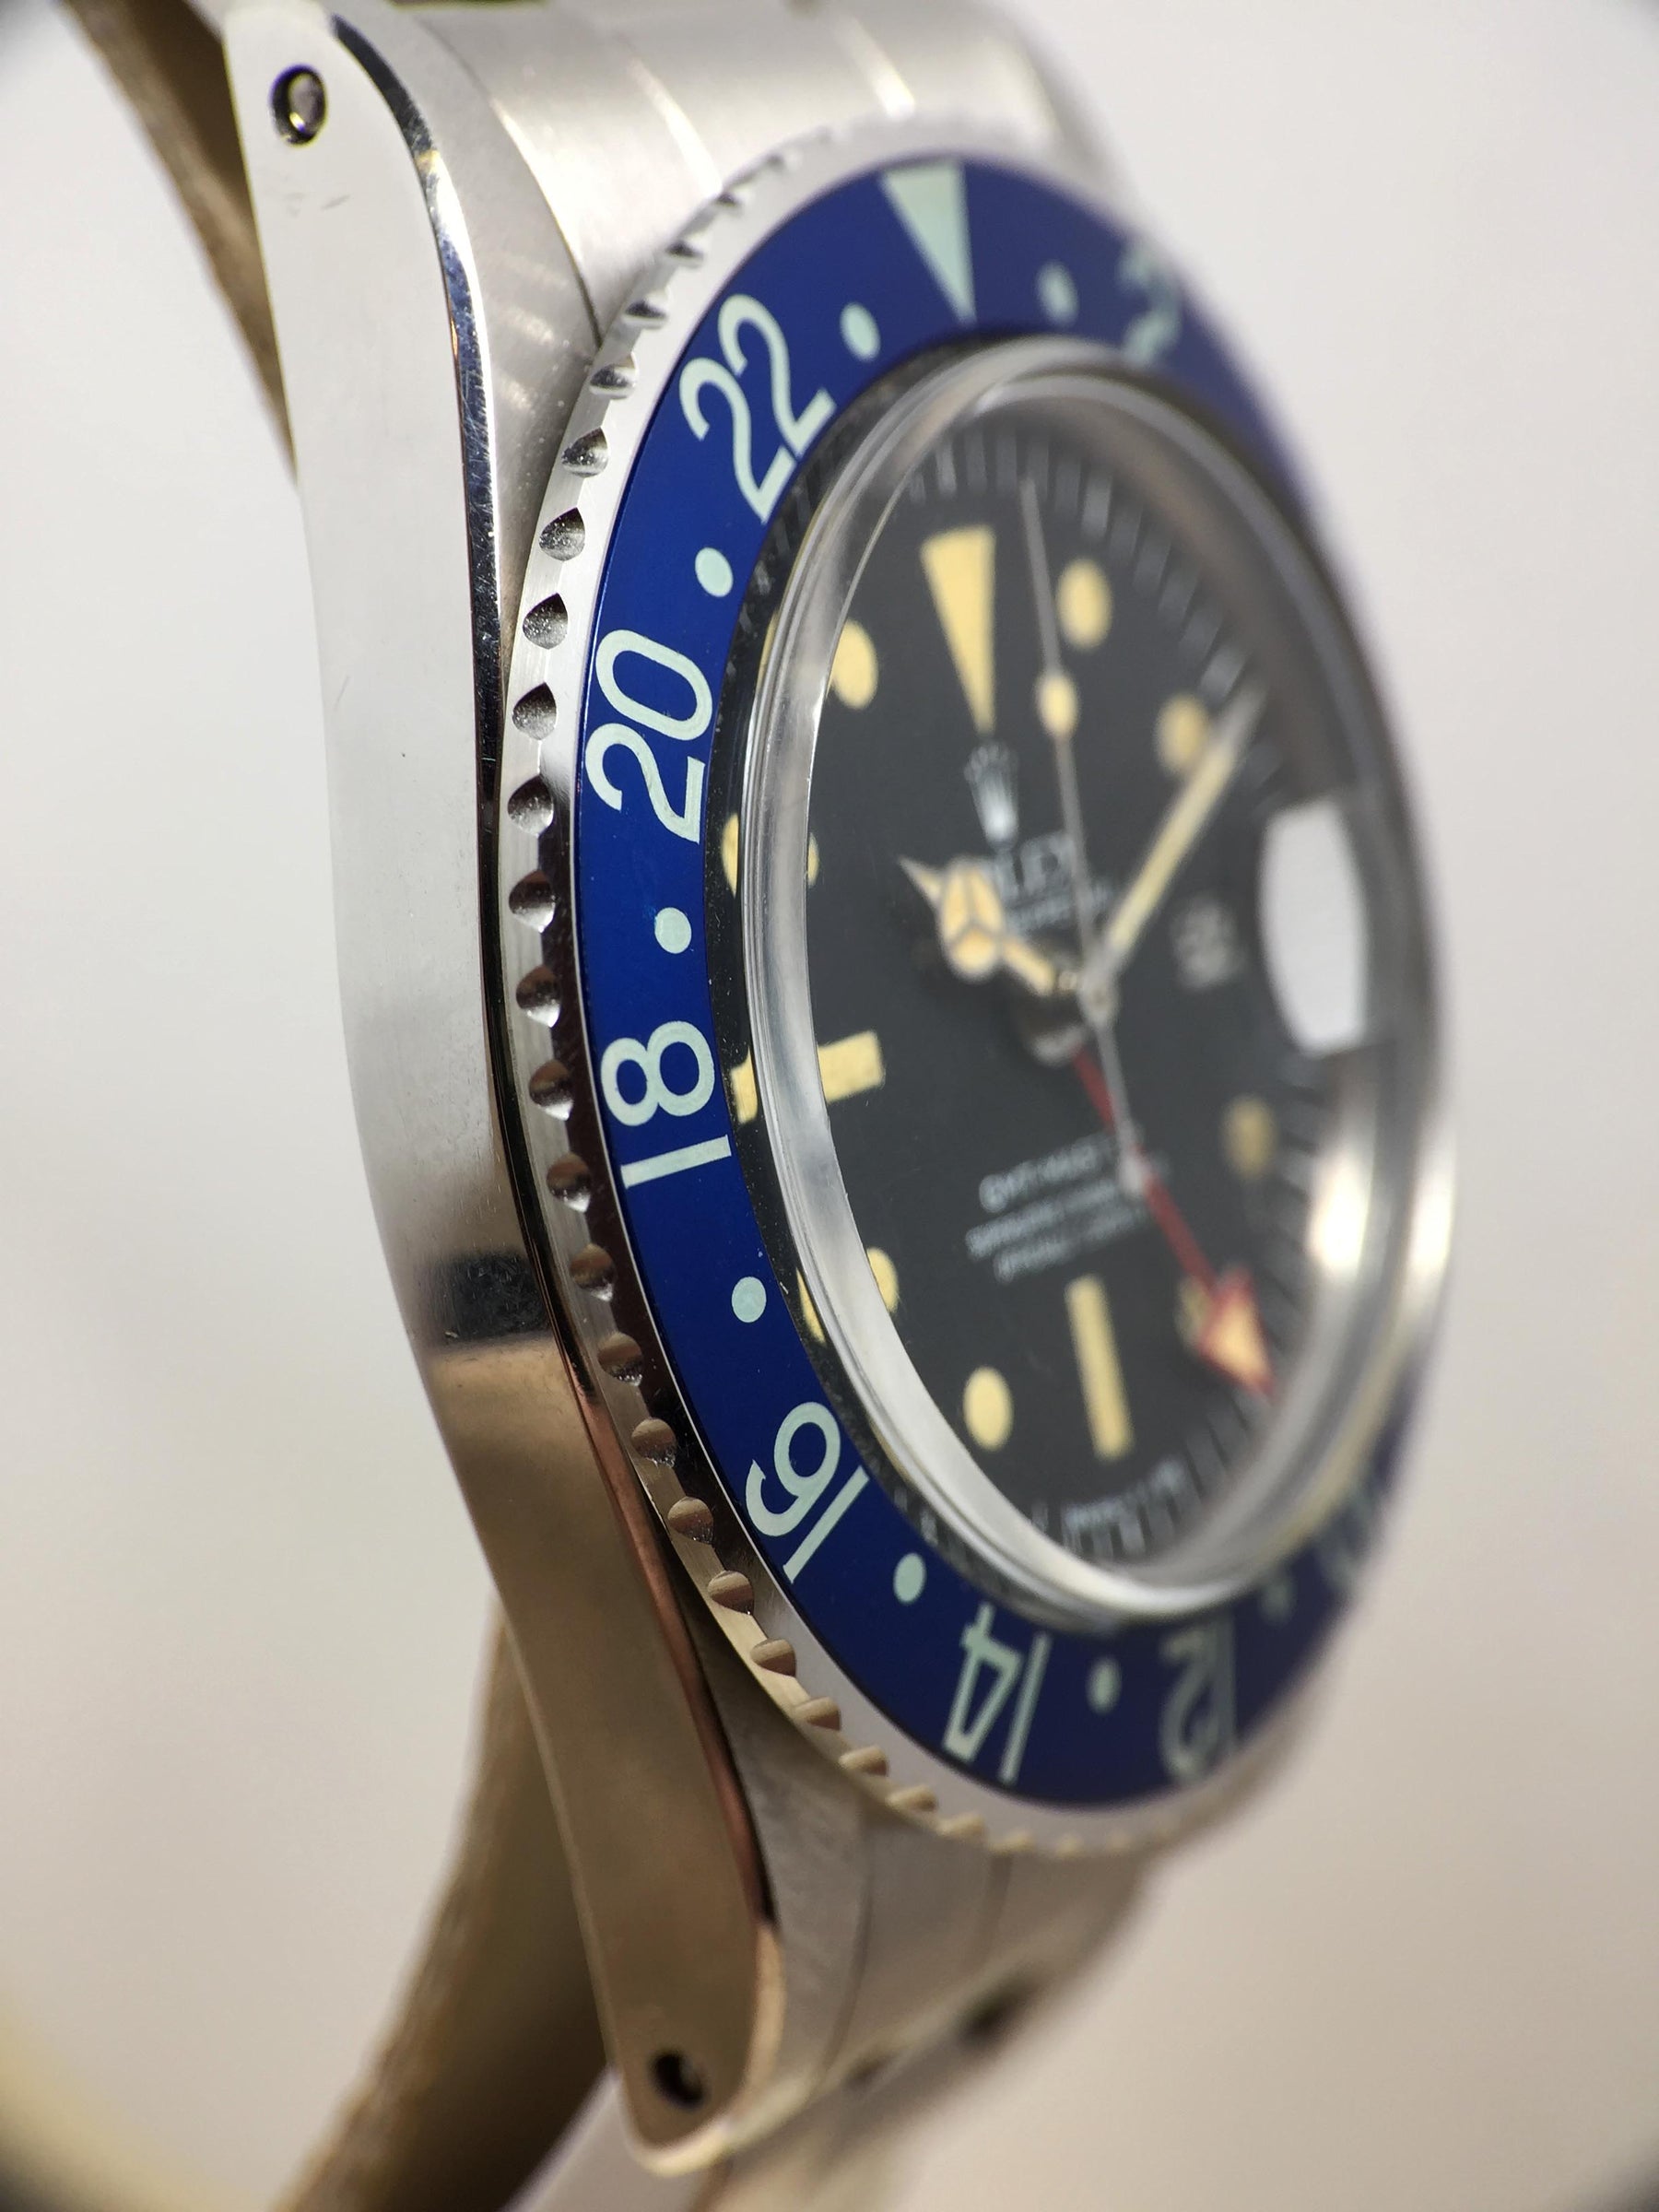 Rolex GMT Master Radial Ref. 1675 Year 1978 (Full Set) - Price on Request